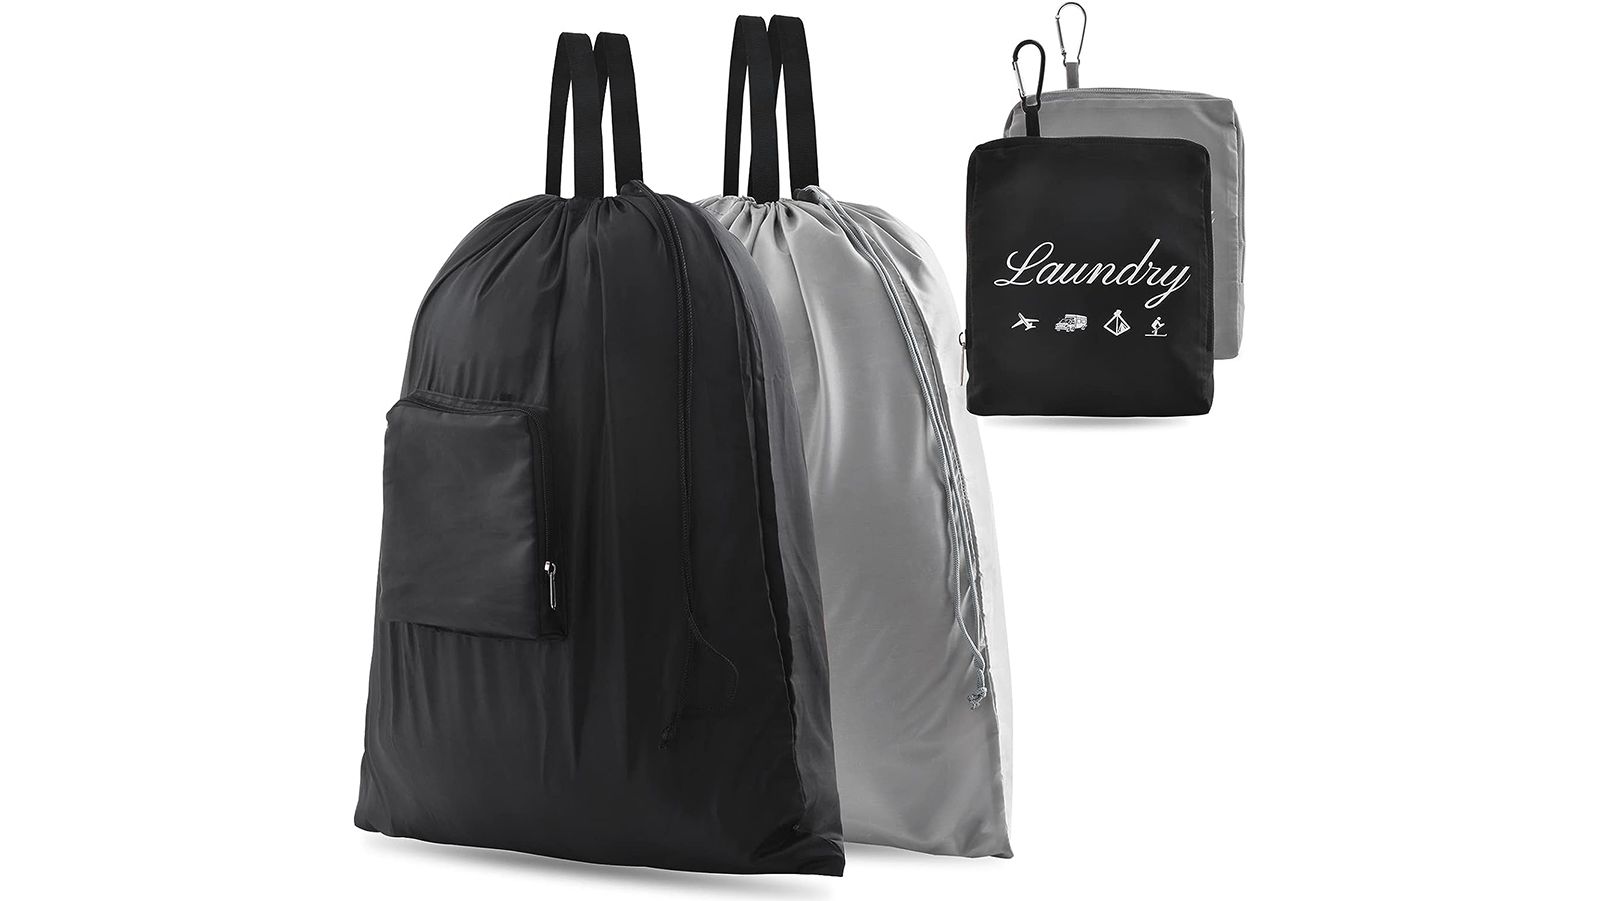 8 Best Travel Laundry Bag Of 2023 - WingsPro